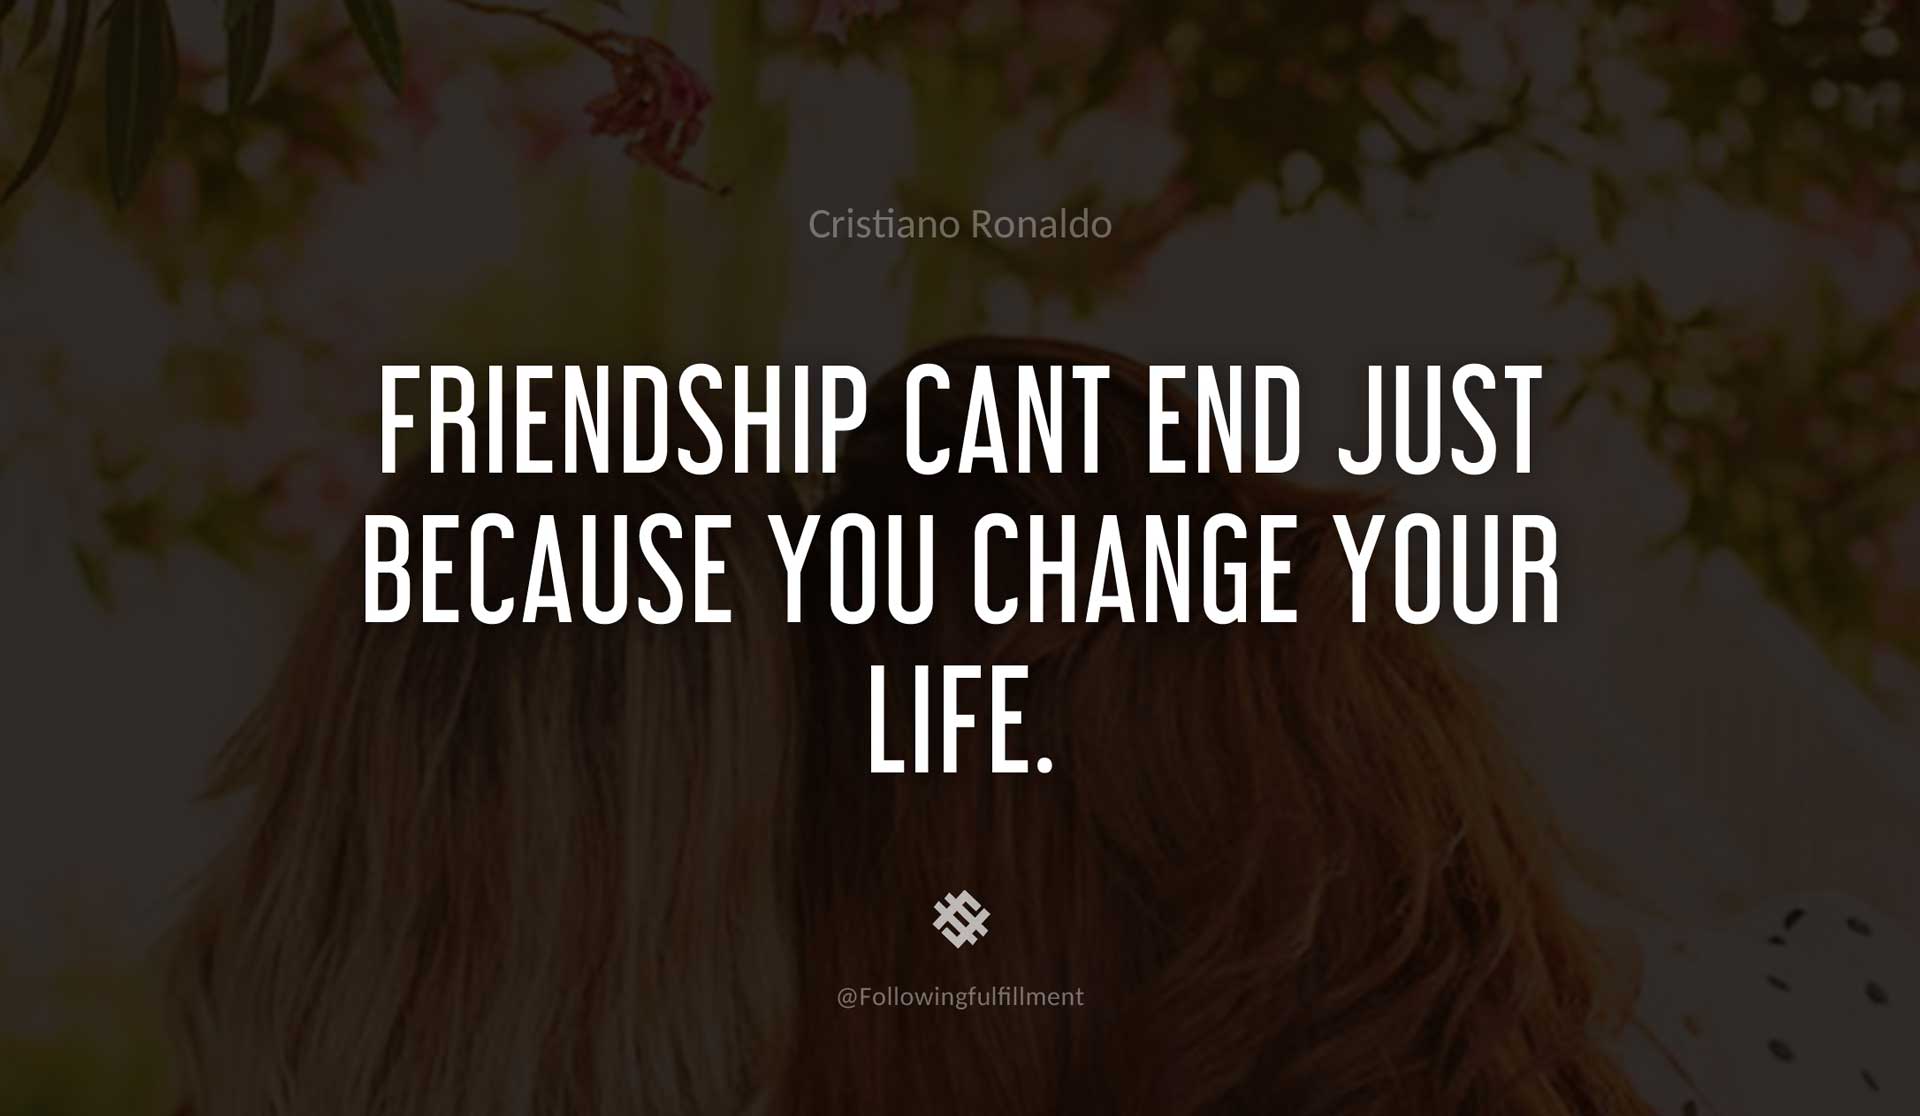 Friendship-cant-end-just-because-you-change-your-life.-CRISTIANO-RONALDO-Quote.jpg